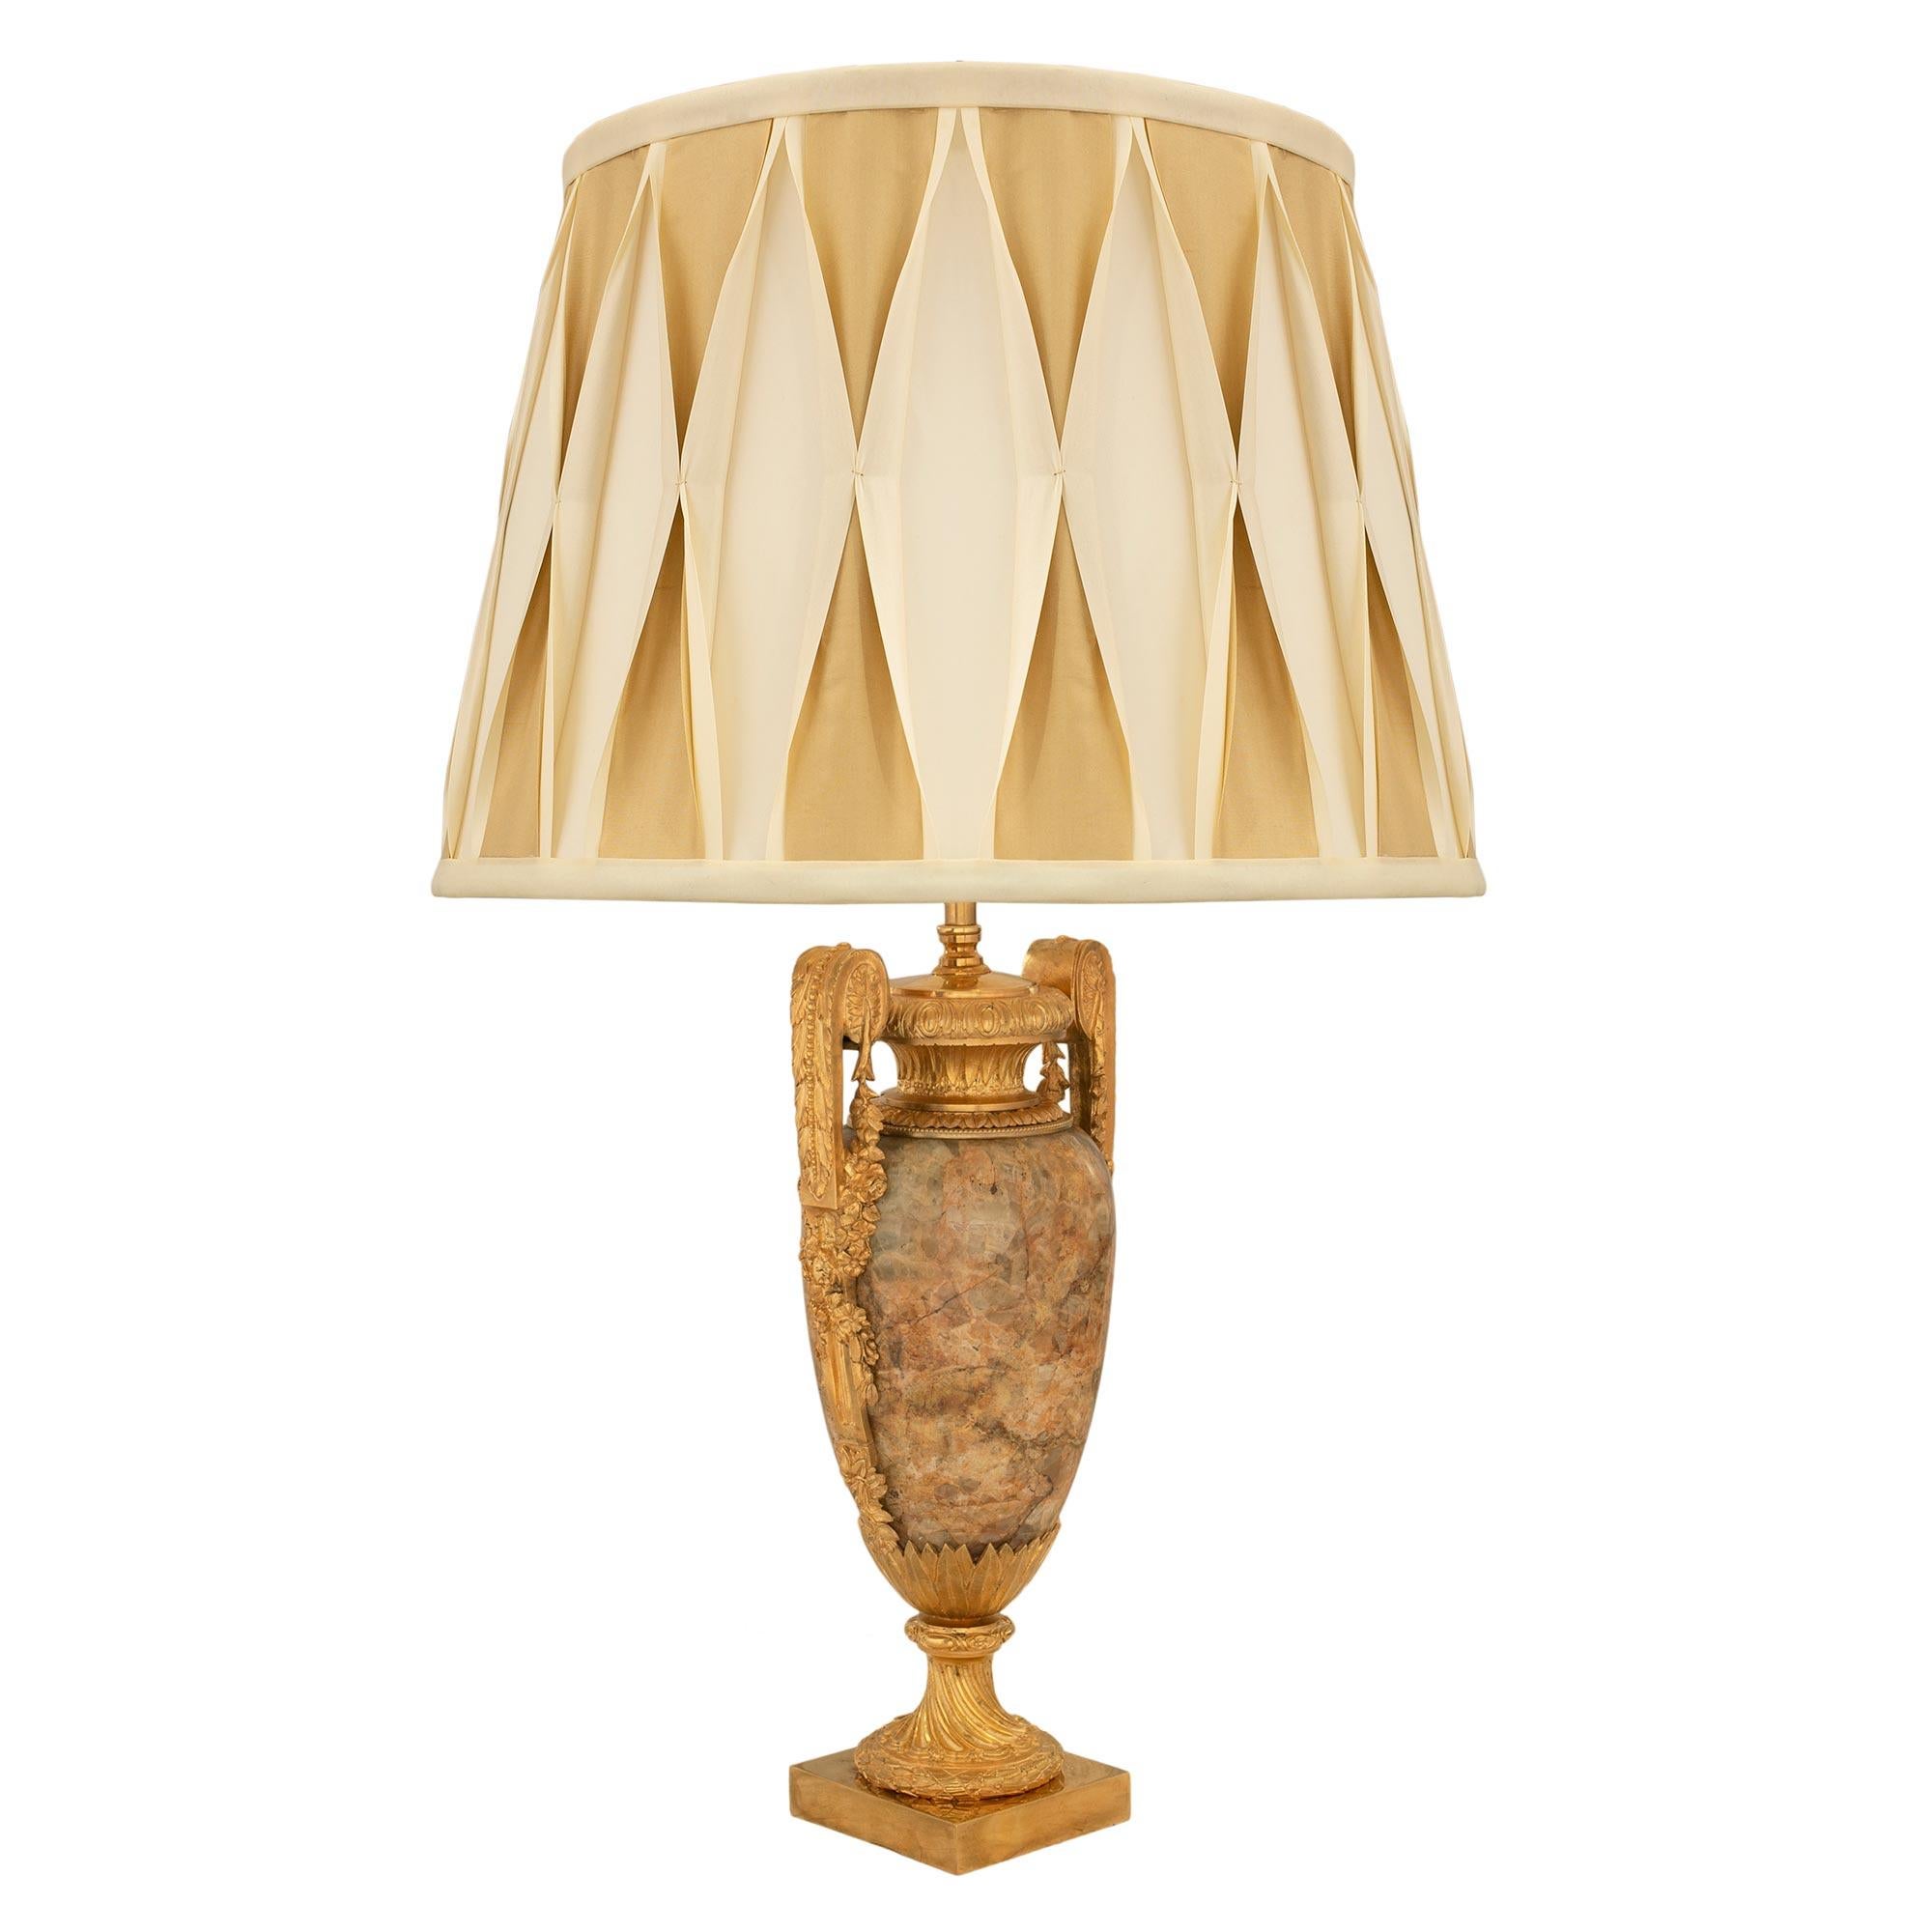 A striking and extremely elegant French 19th century Louis XVI st. Alabastro Fiorito Marble and ormolu lamp. The lamp is raised by an ormolu square base below the beautiful fluted spiral socle pedestal decorated with a wrap around berried laurel